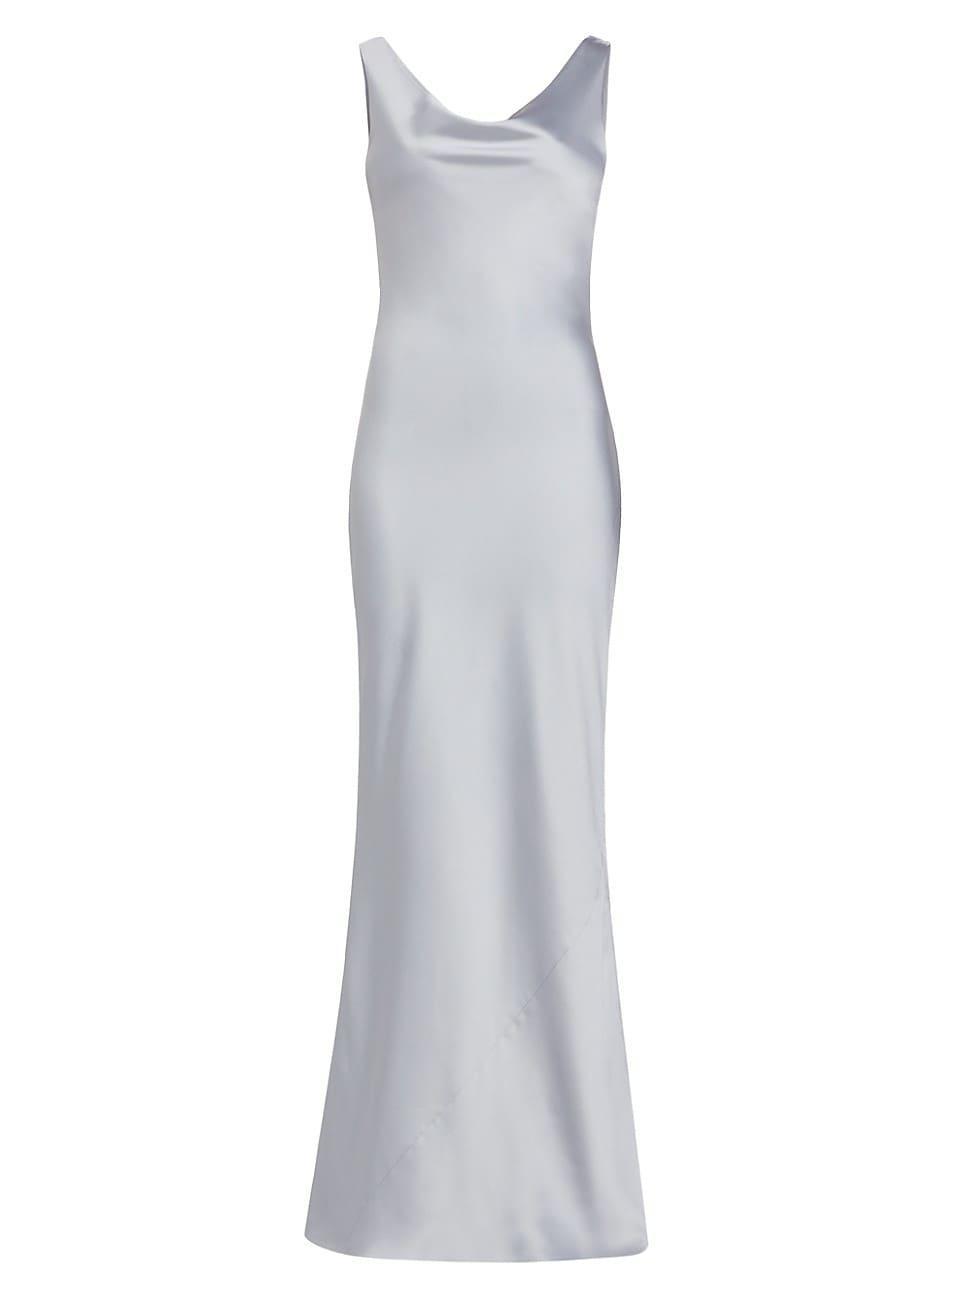 Womens Satin Cowlneck Sleeveless Gown Product Image